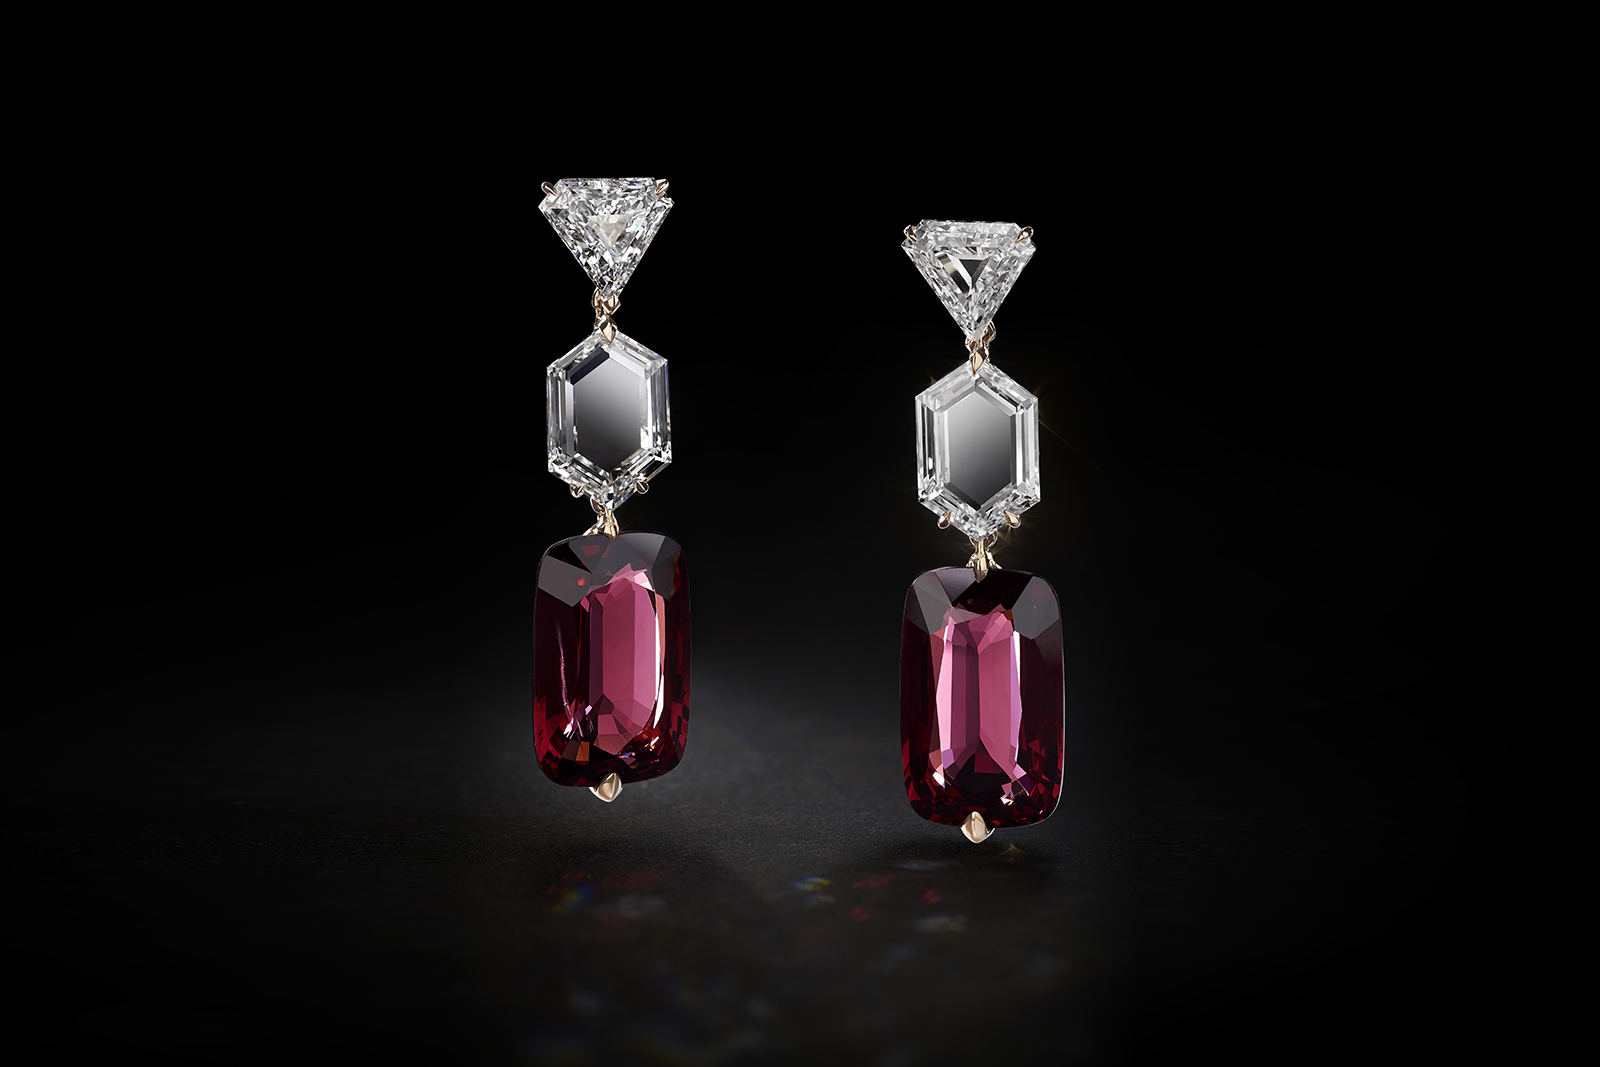 House of Geneva Horloge Fleurie Numéro 3 earrings with antique cushion-cut Burmese spinels of 6.69 and 7.26 carats, descended from two shield-cut diamonds and two portrait-cut diamonds of 2.03 and 2.08 carats